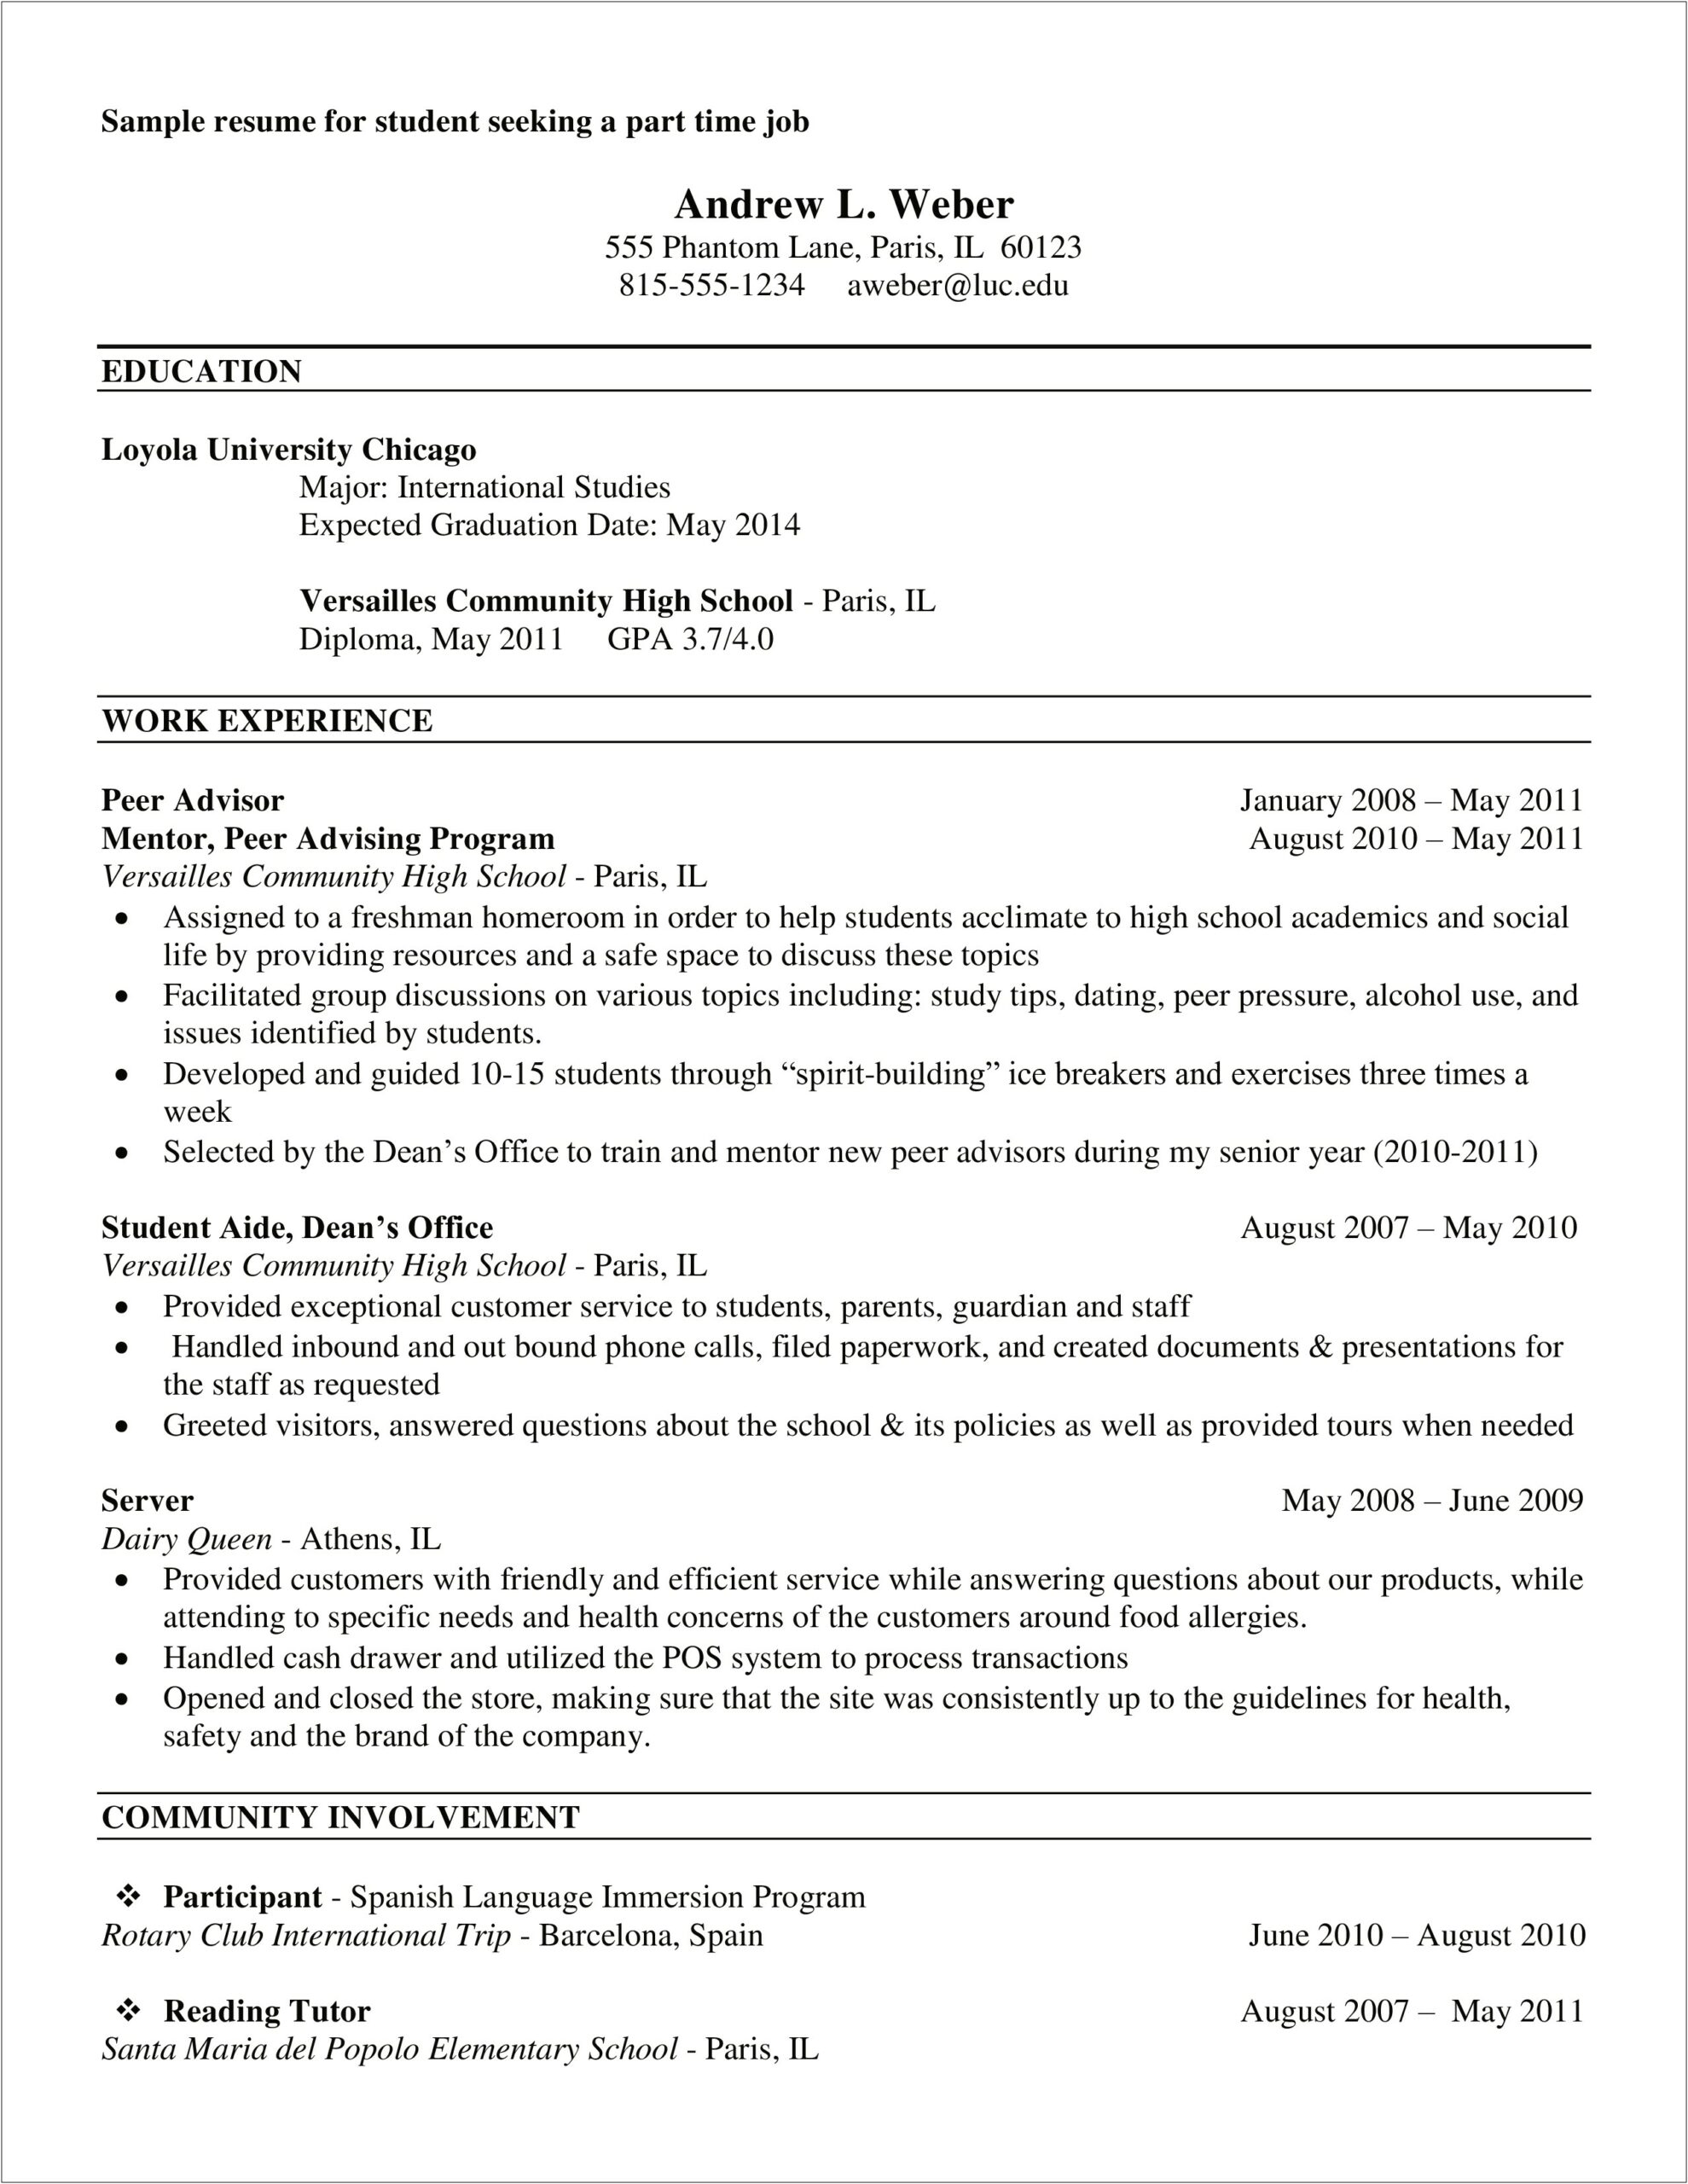 Should I Put Part Time Jobs In Resume